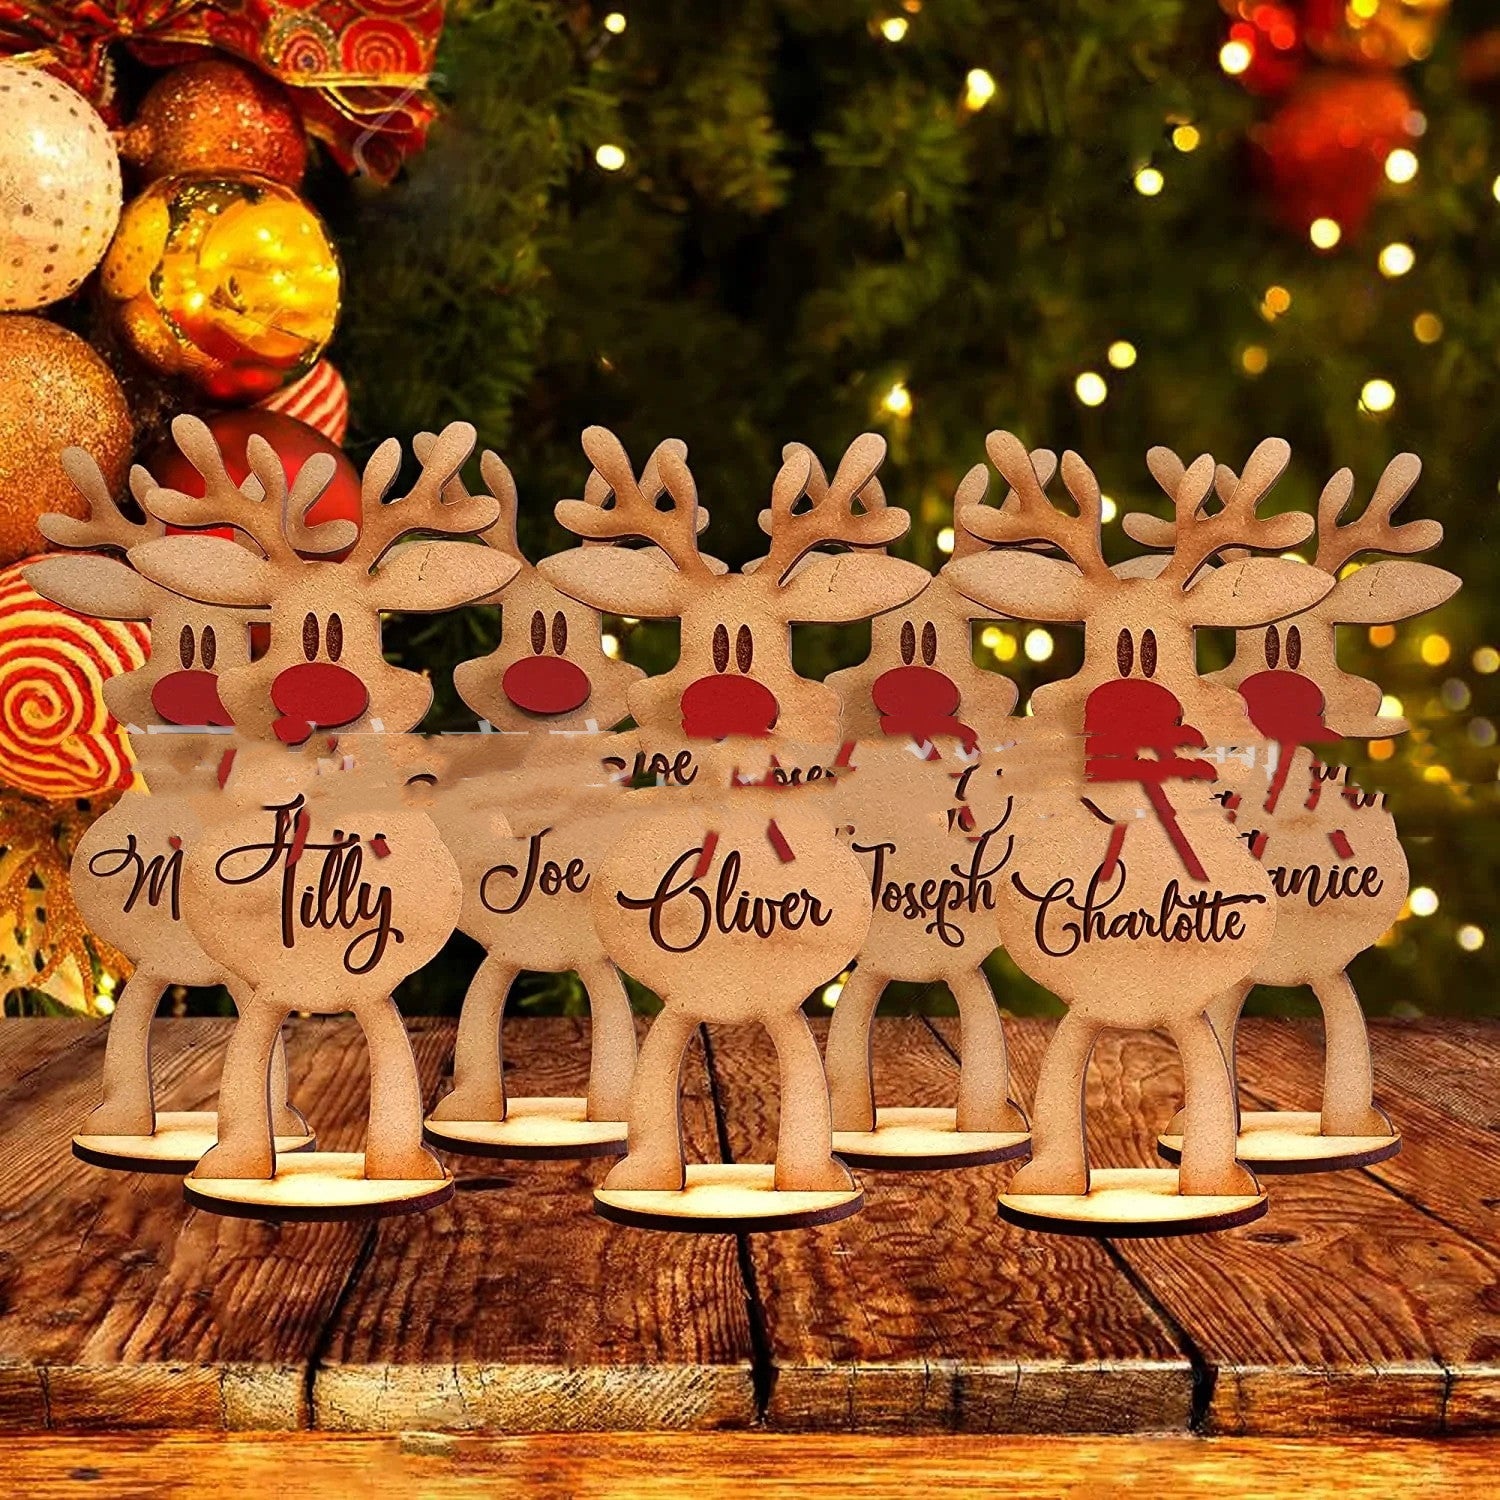 Elk Reindeer Family Christmas Ornament Decoration,Outdoor and Indoor Christmas decorations Items, Christmas ornaments, Christmas tree decorations, salt dough ornaments, Christmas window decorations, cheap Christmas decorations, snowmen, and ornaments.